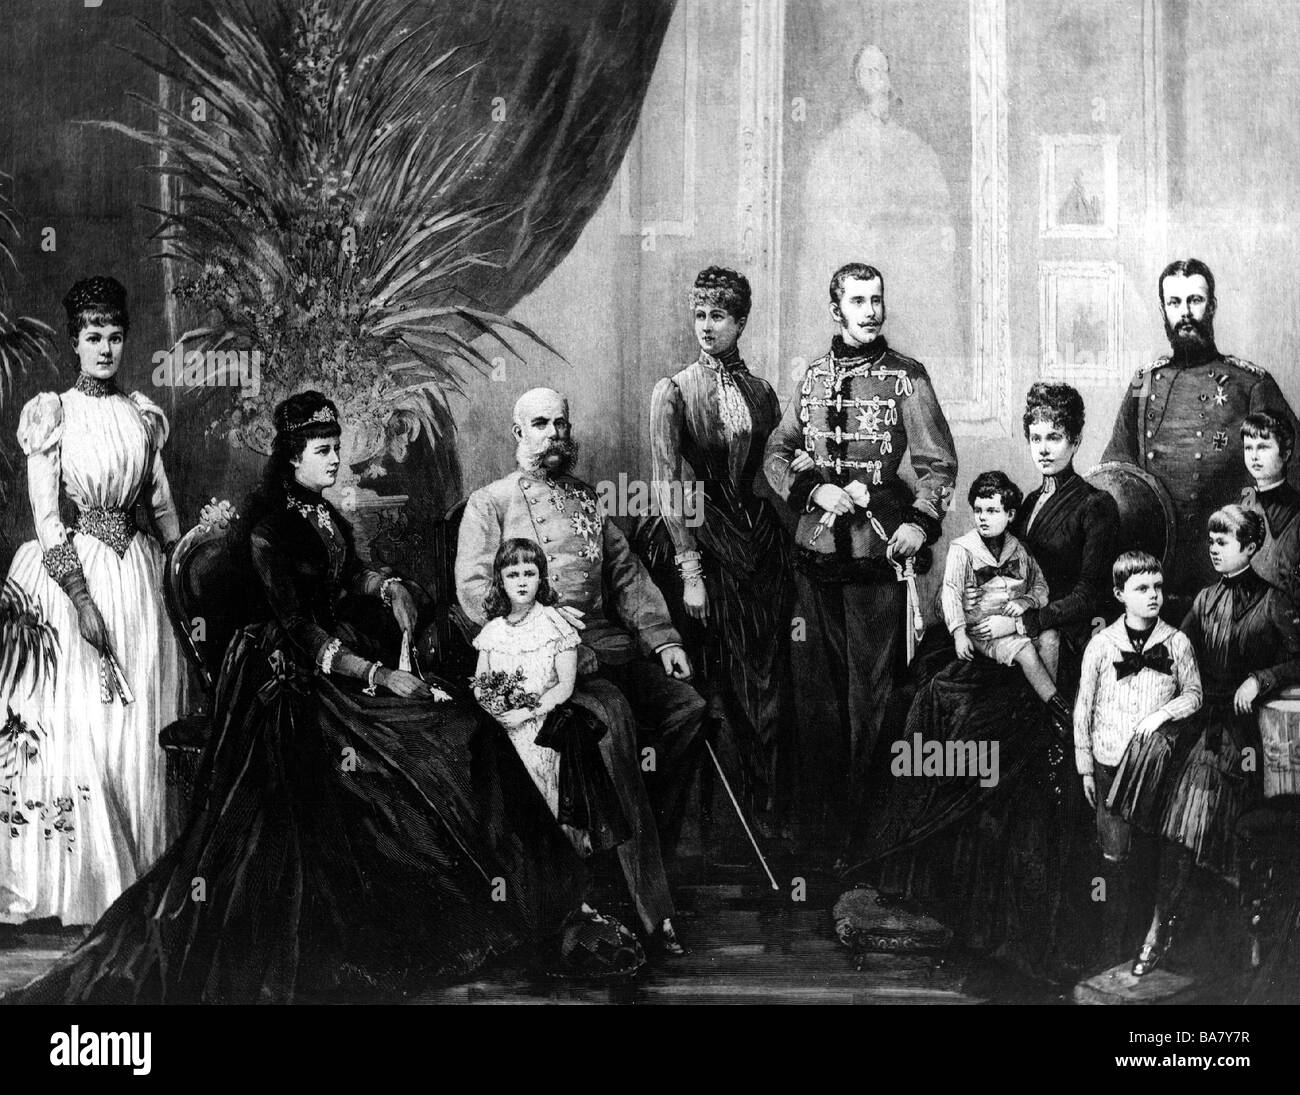 Franz Joseph I, 18.8.1830 - 21.11.1916, Emperor of Austria since 1848, with his family, wood engraving after drawing by Theodor Volz, 1889, Stock Photo